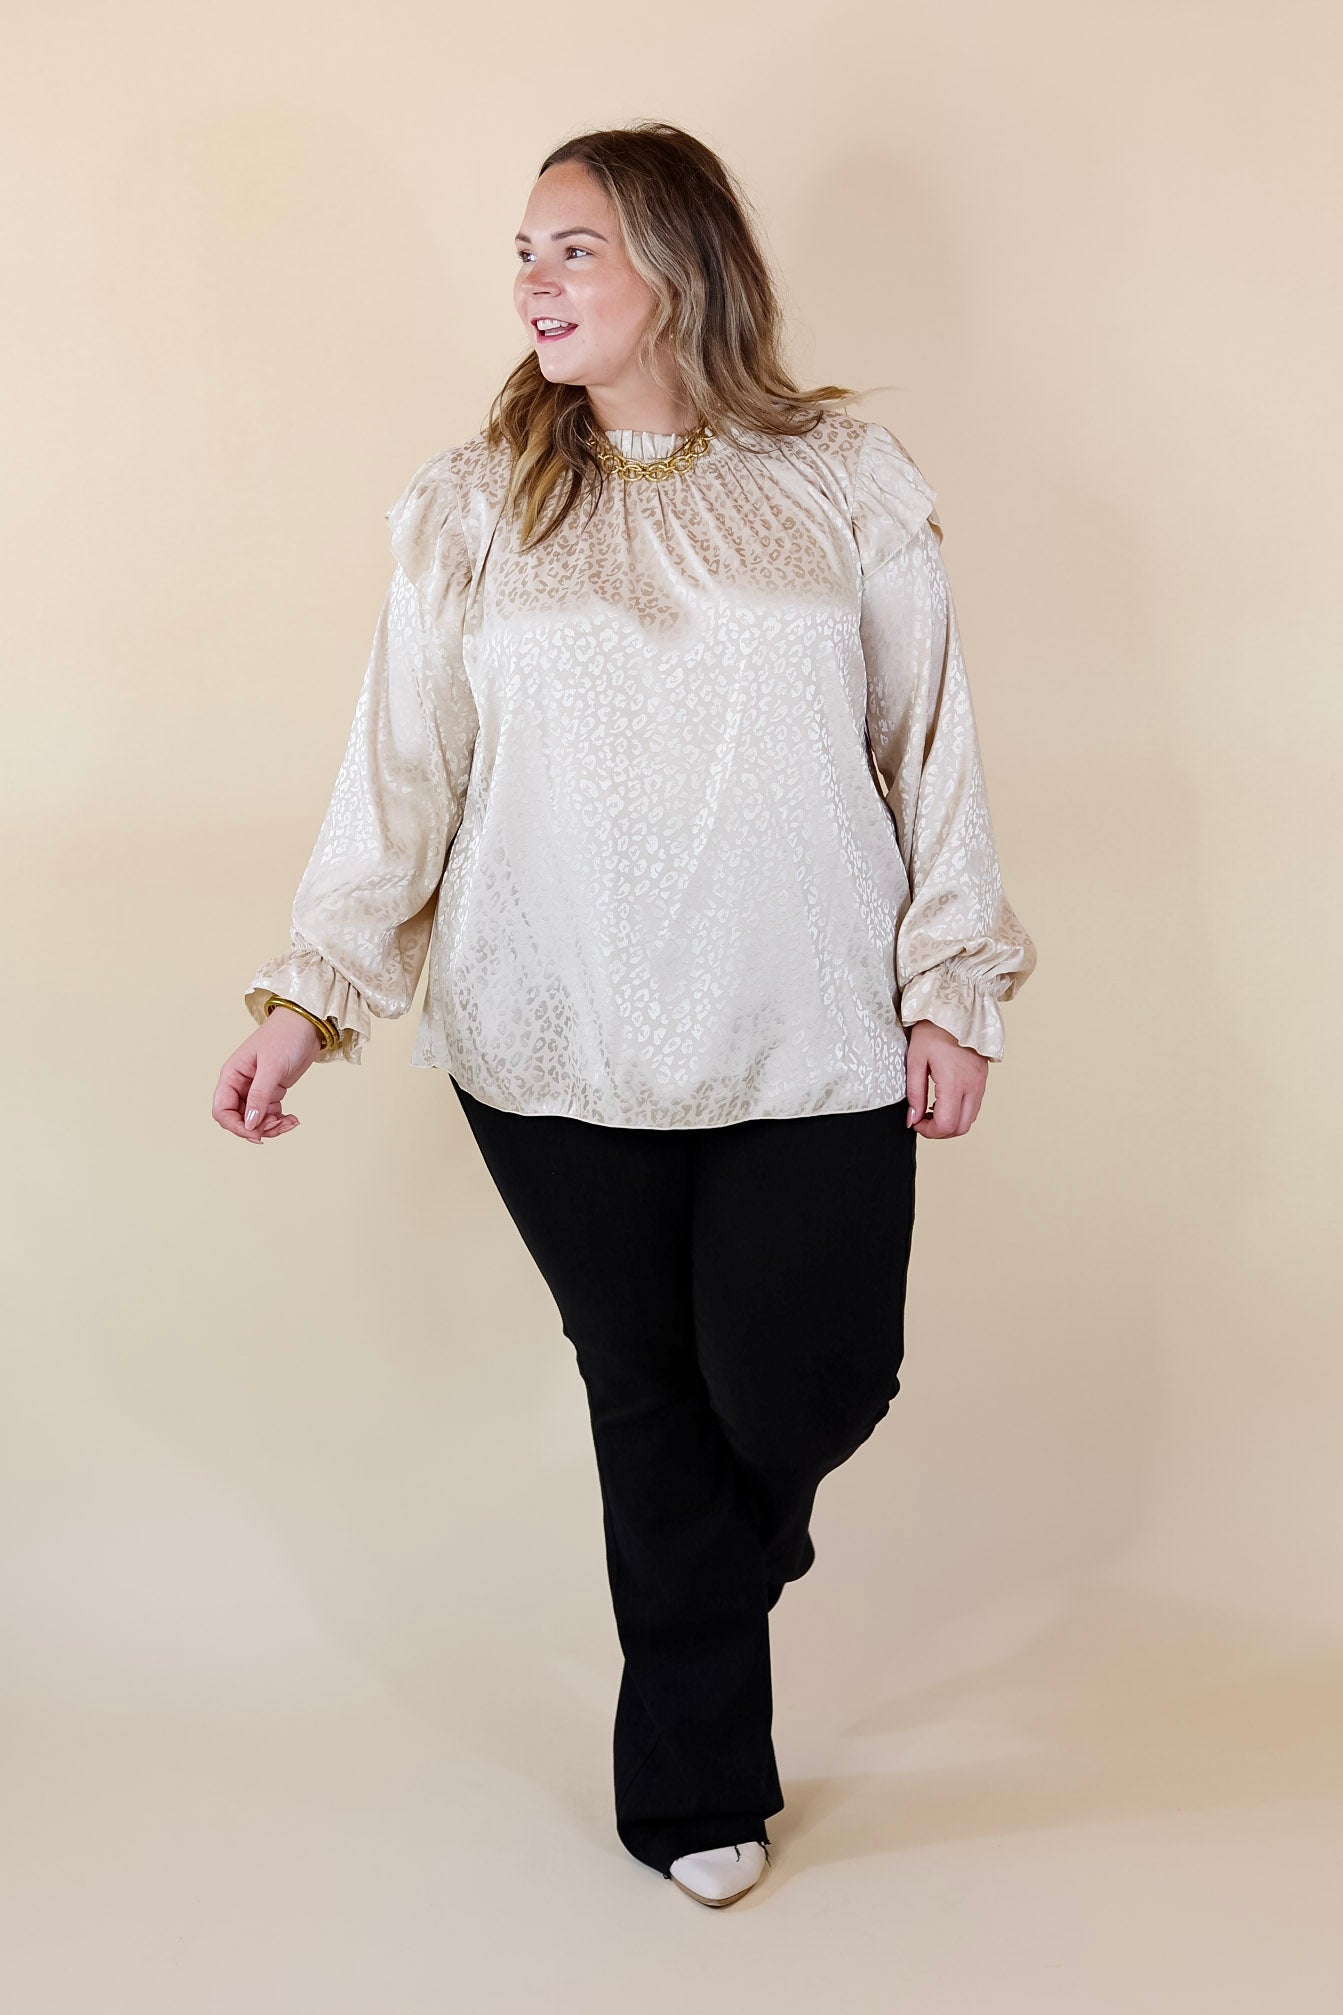 Can't Stop Me Ruffle Mock Neck Long Sleeve Leopard Print Satin Top in Ivory - Giddy Up Glamour Boutique